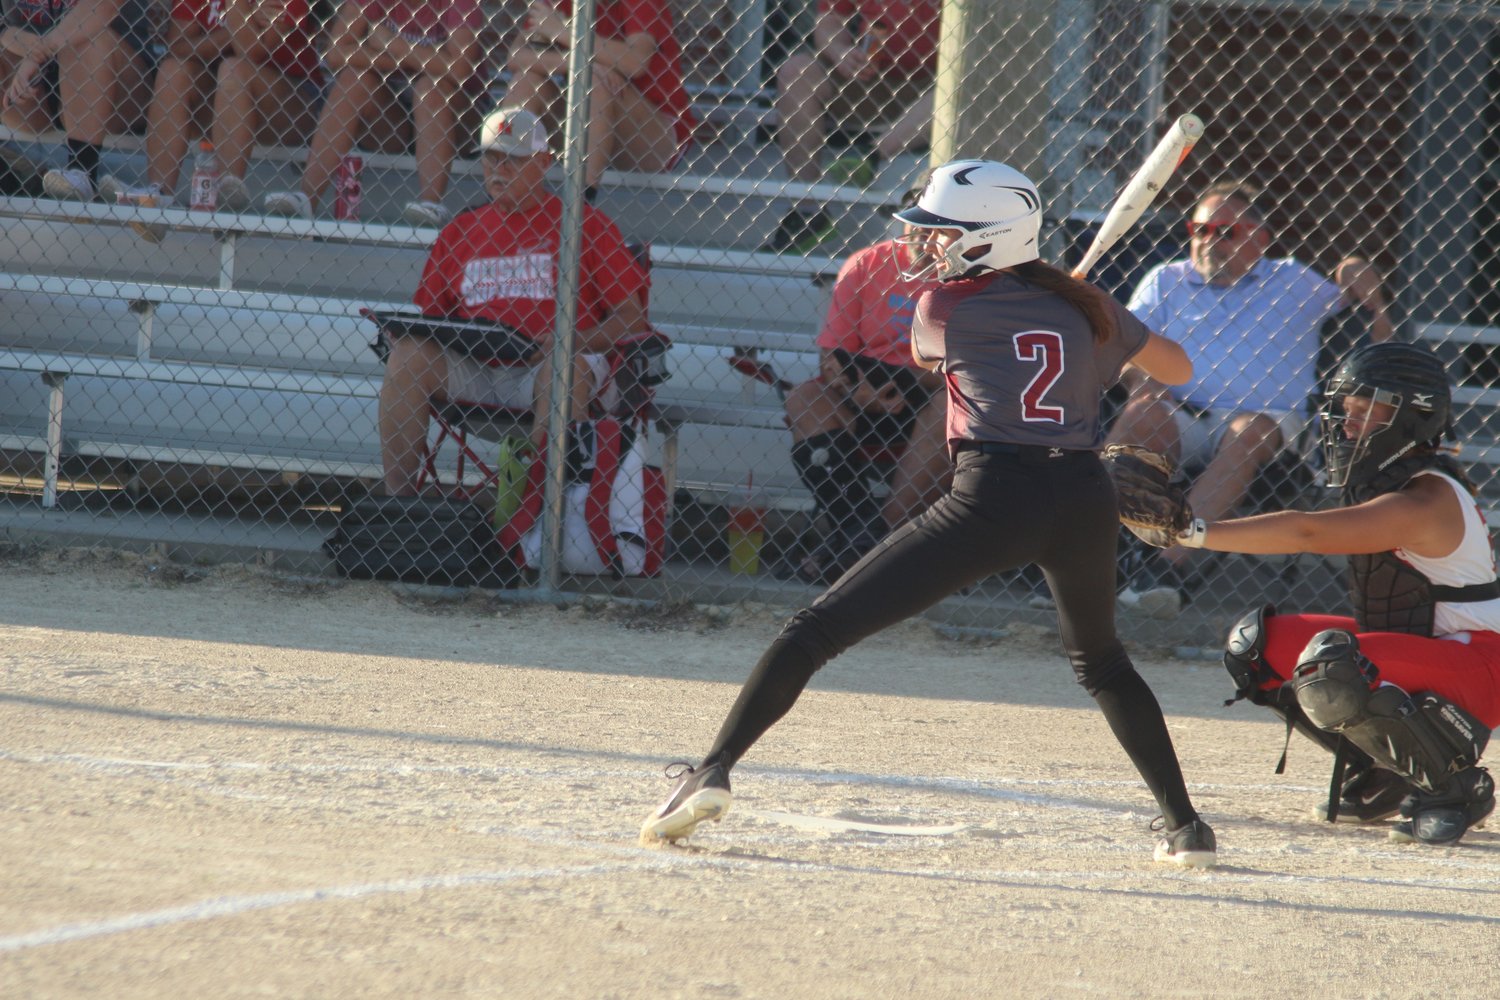 Norah Yoder of Hillcrest digs in to take a swing in Monday’s game.